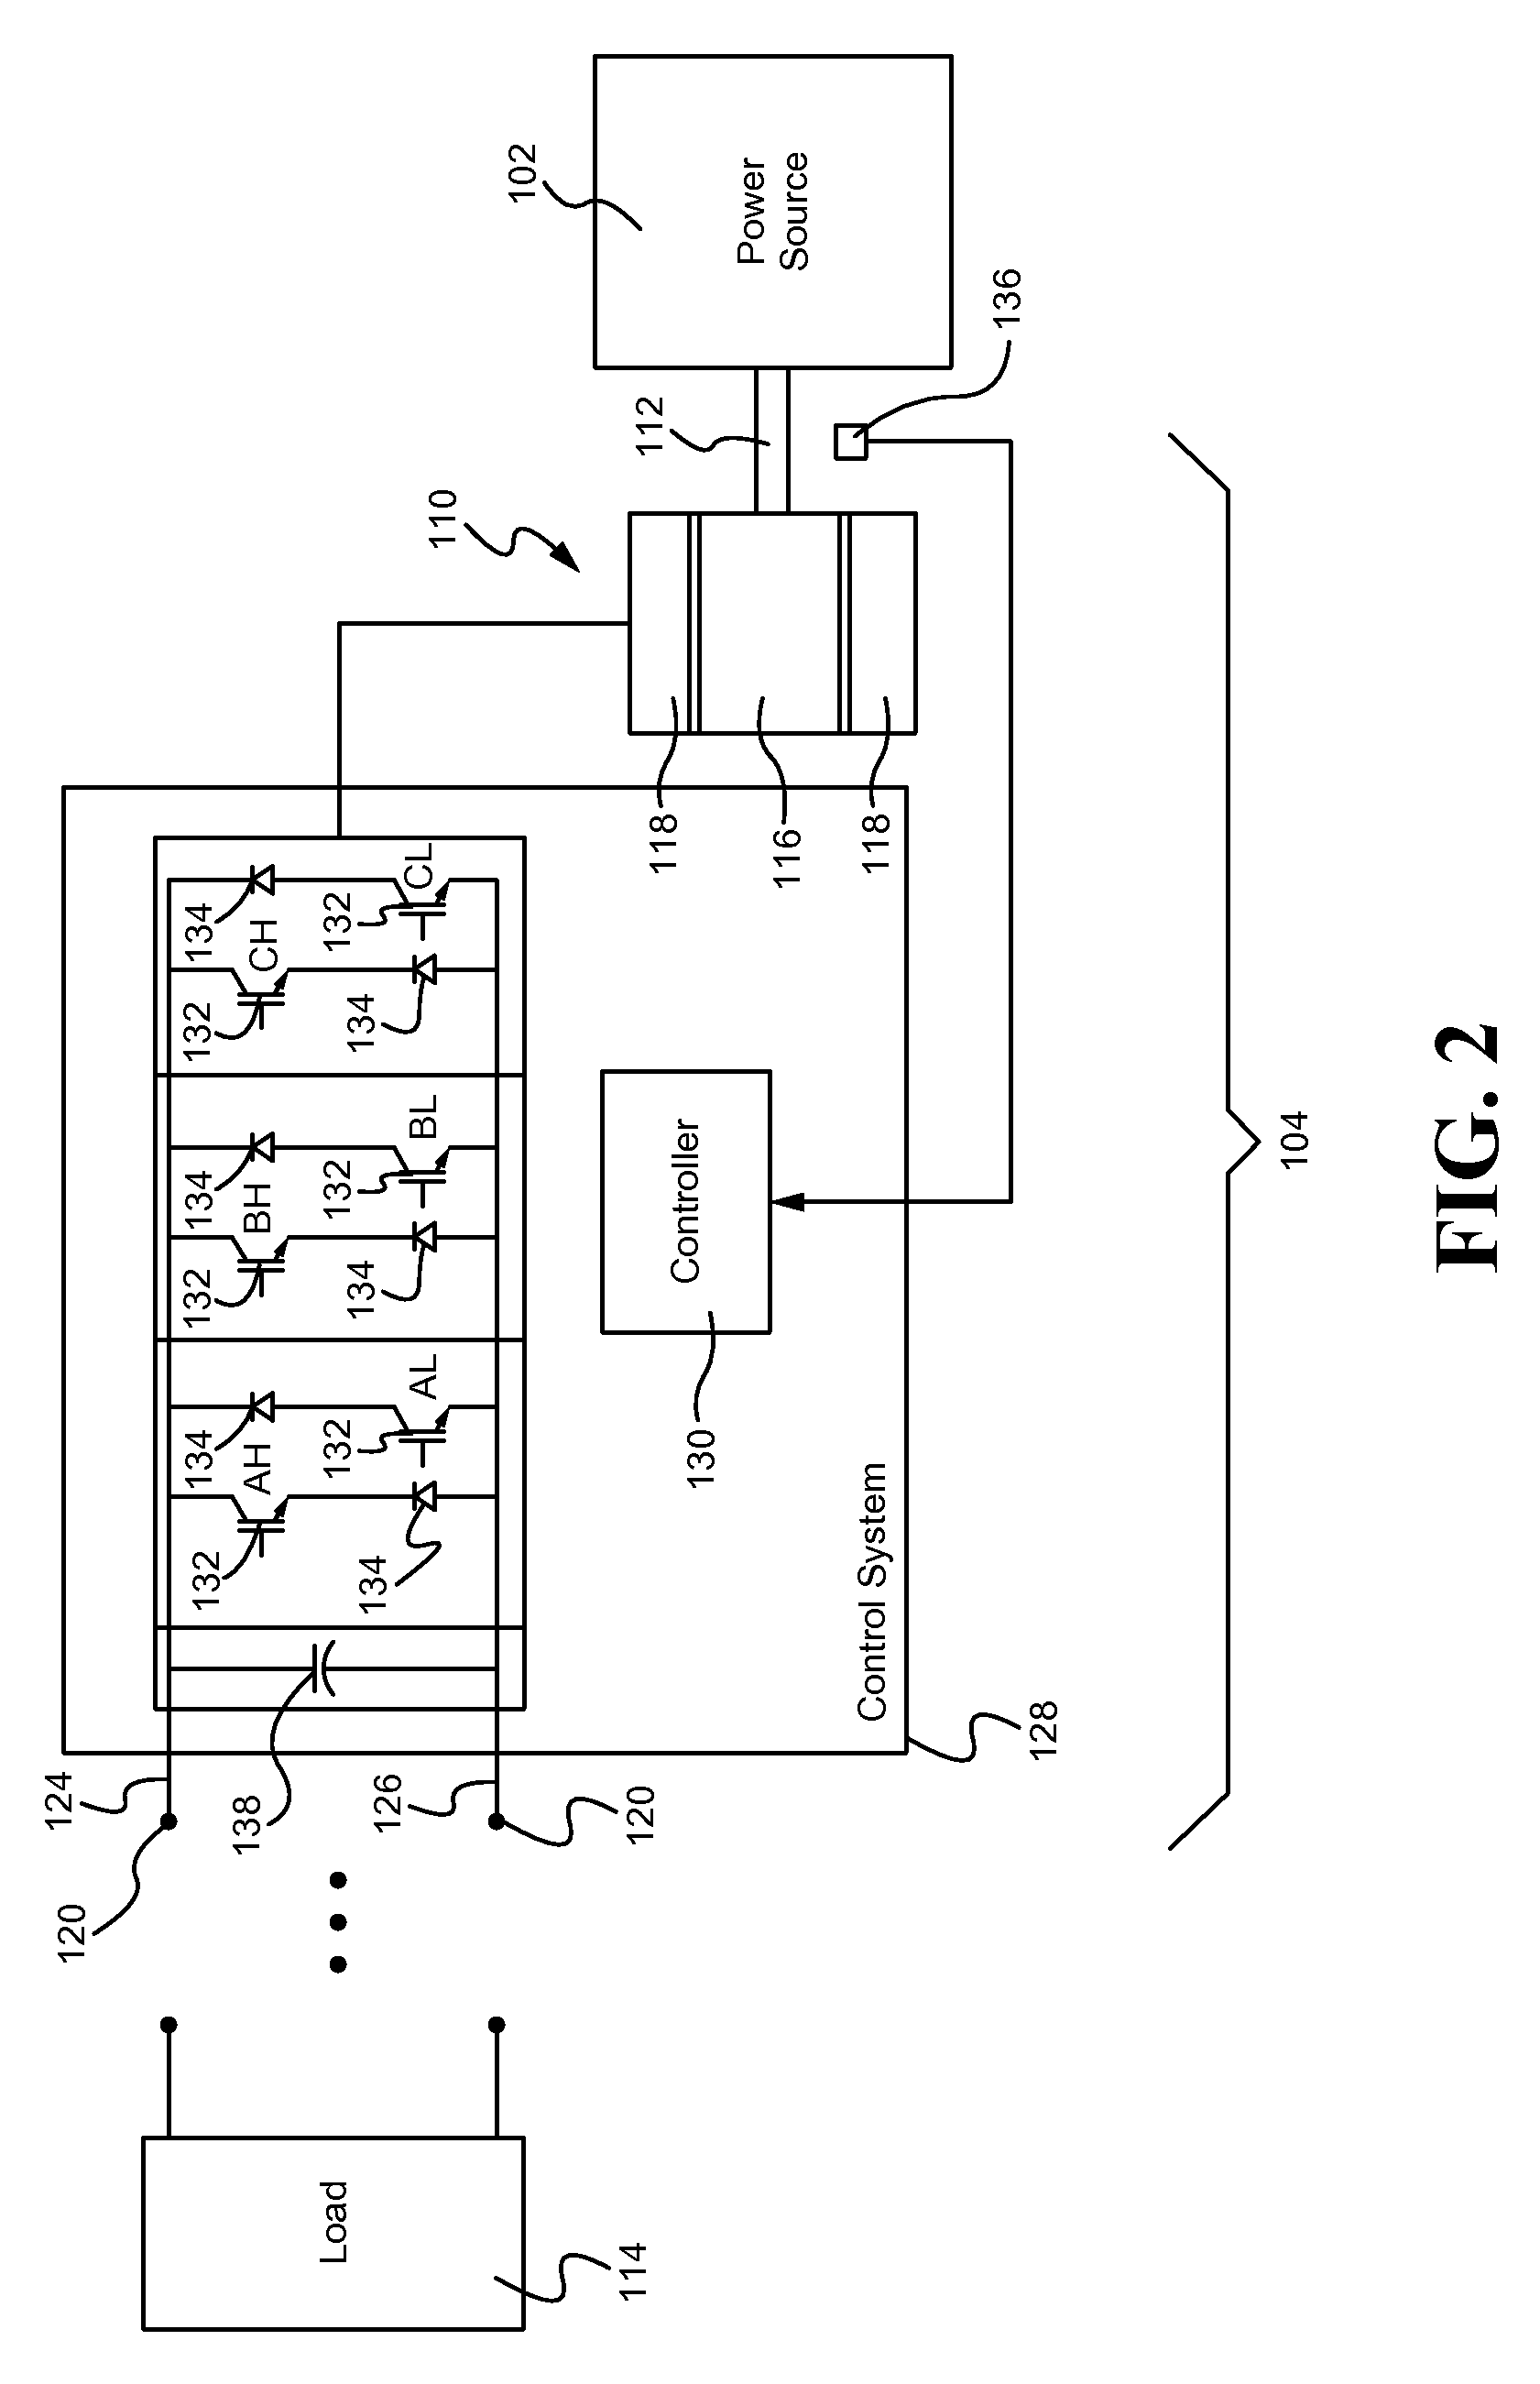 Compensating hysteresis bands to hold specified switching frequency